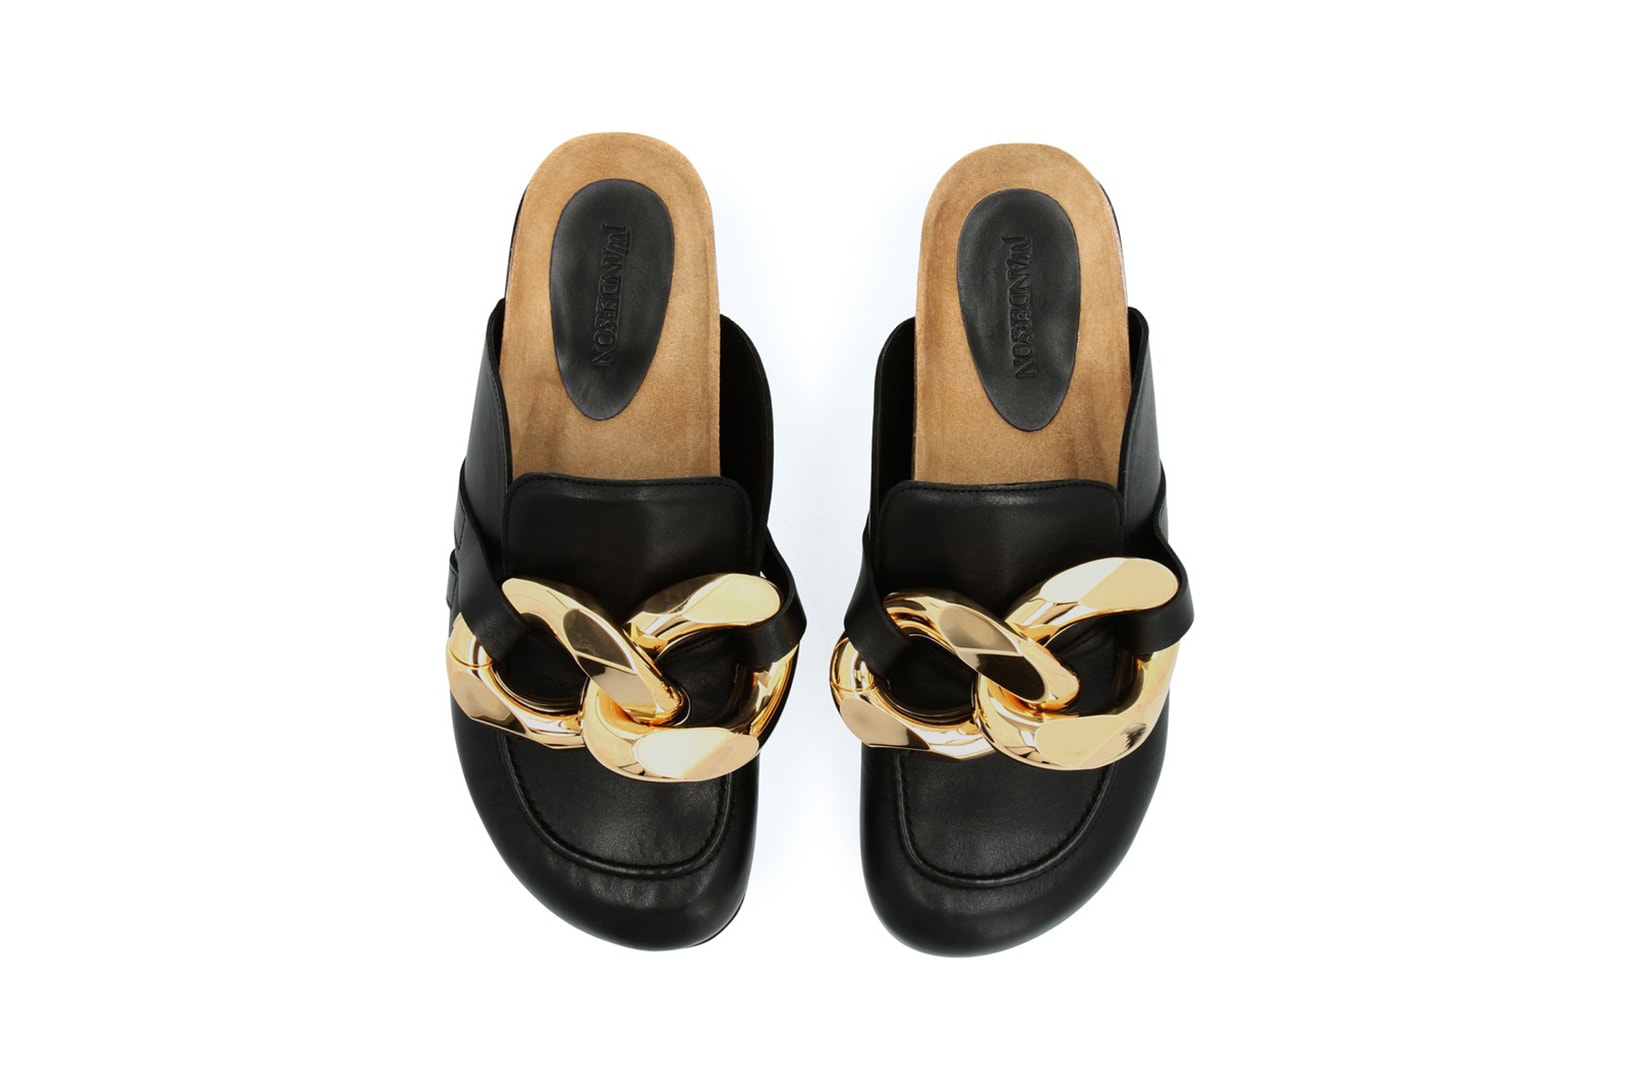 jw jonathan anderson chain loafer black gold leather shoes footwear